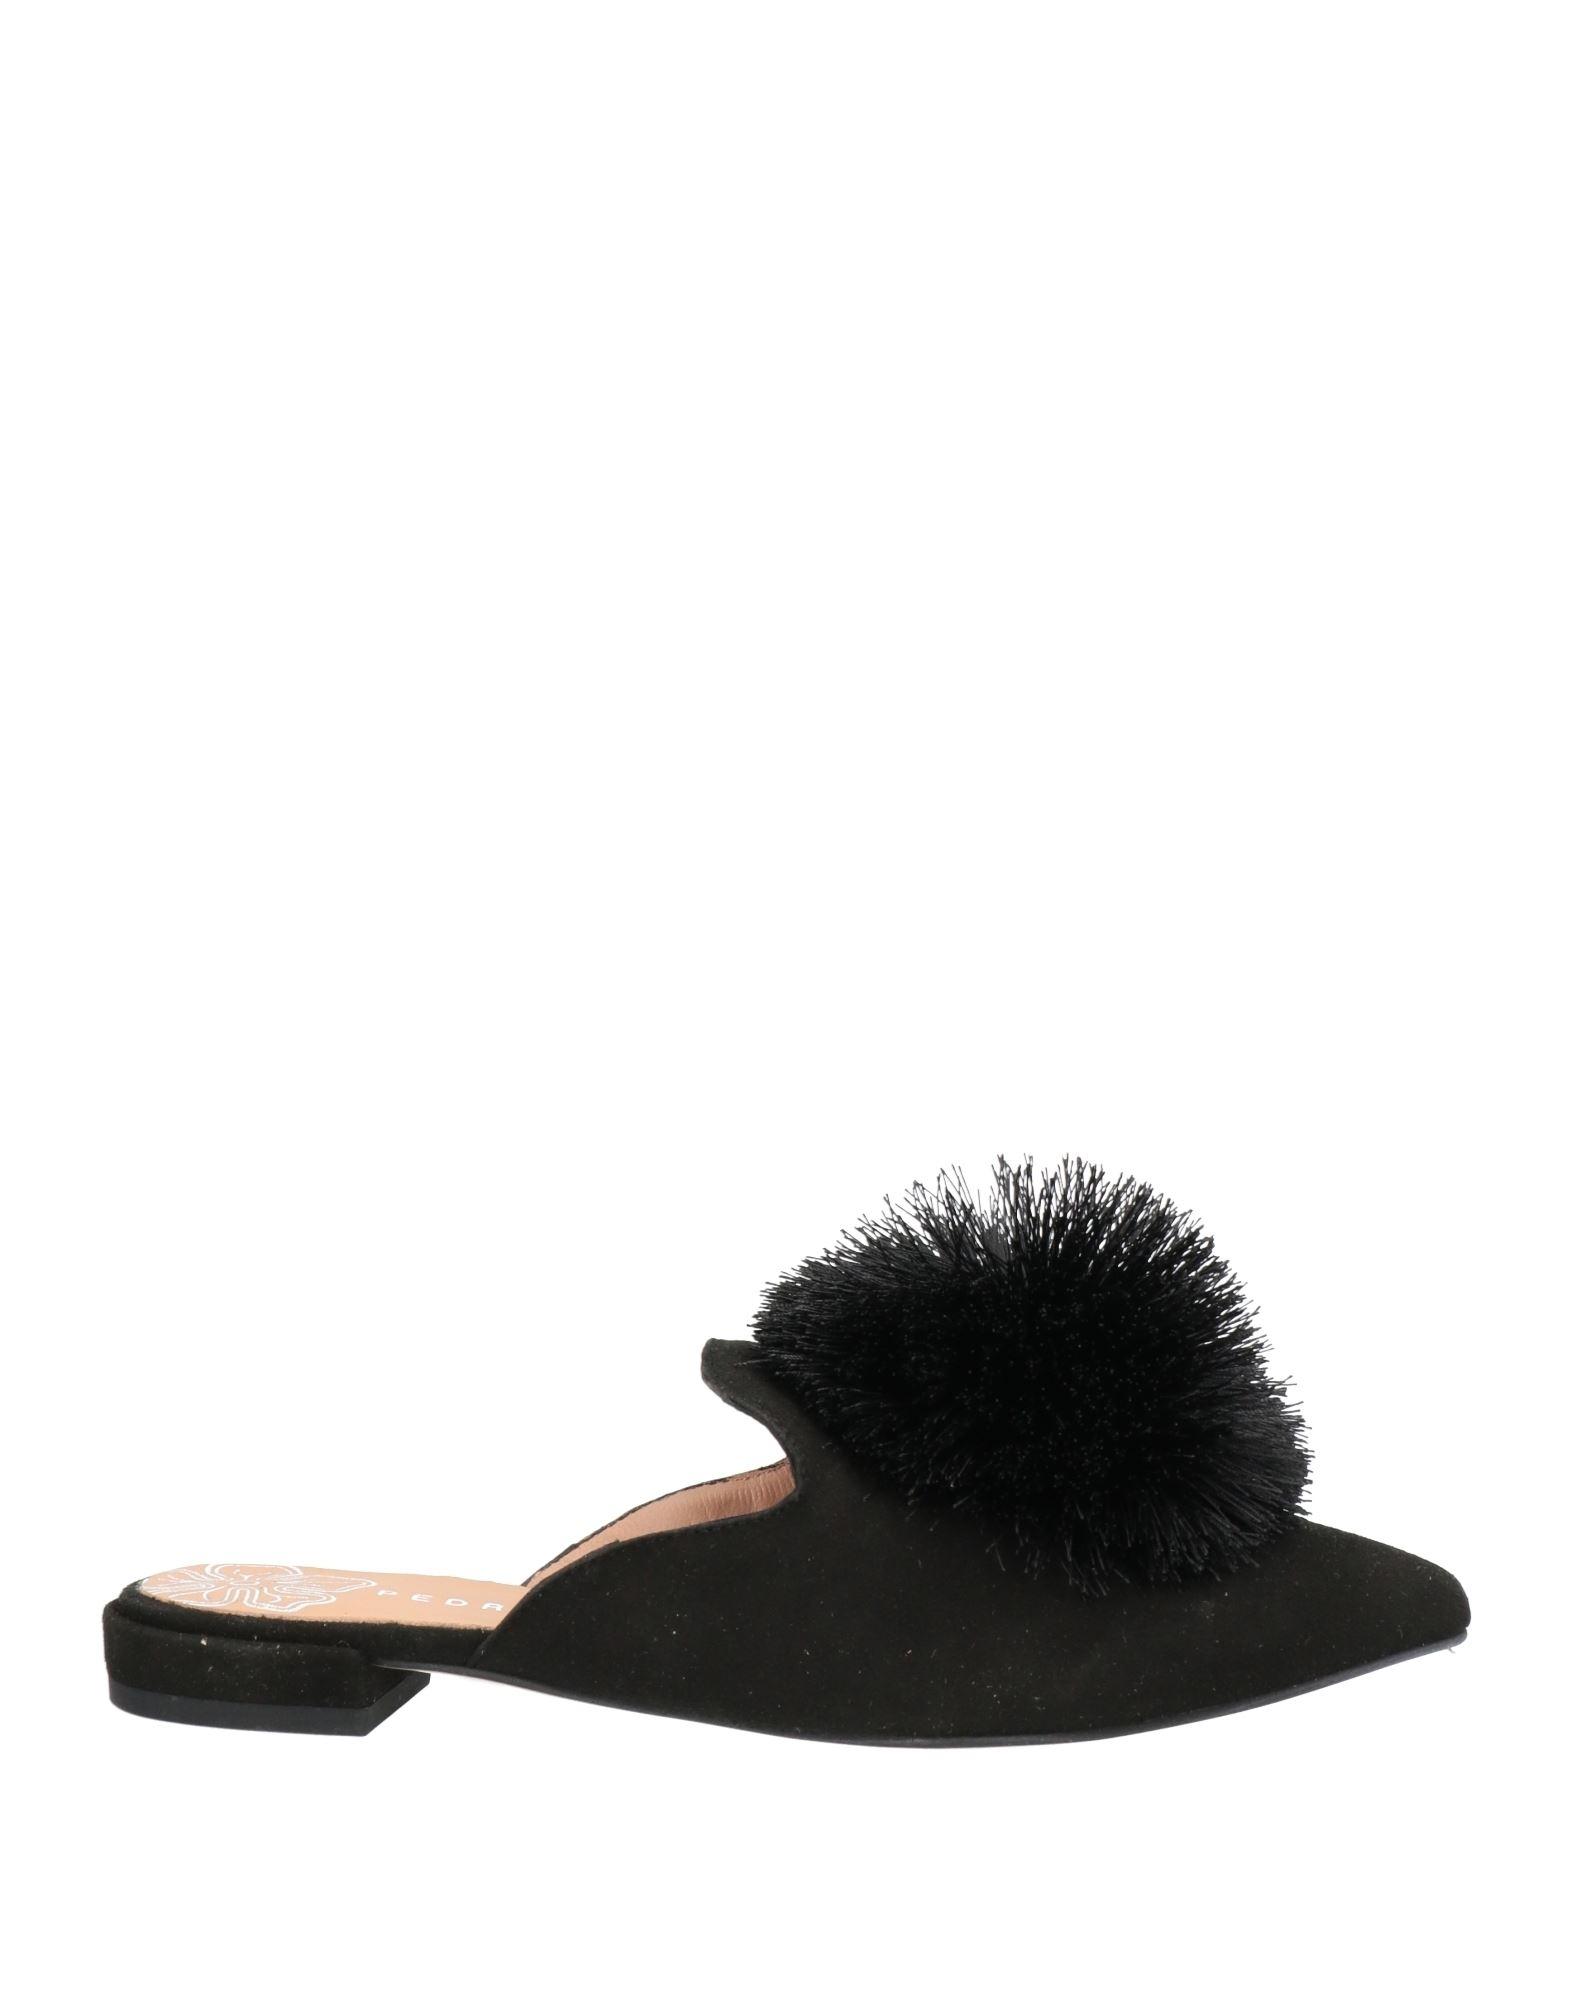 Pedro Miralles Mules & Clogs in Black | Lyst